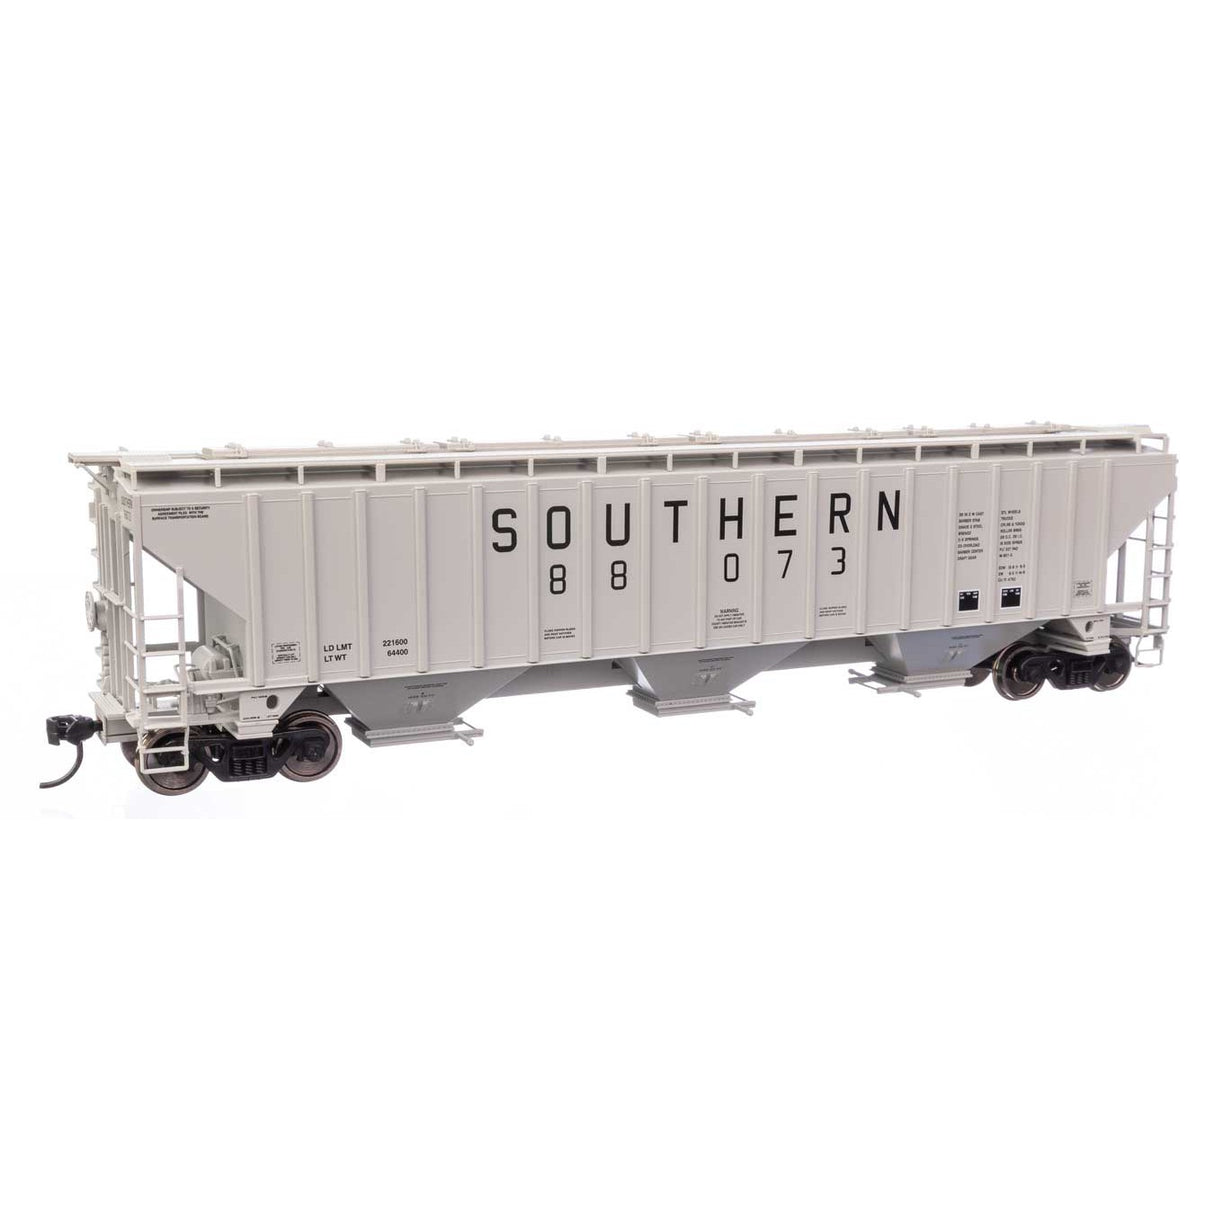 Walthers Mainline HO Scale Southern 88073 Trinity 4750 Covered Hopper